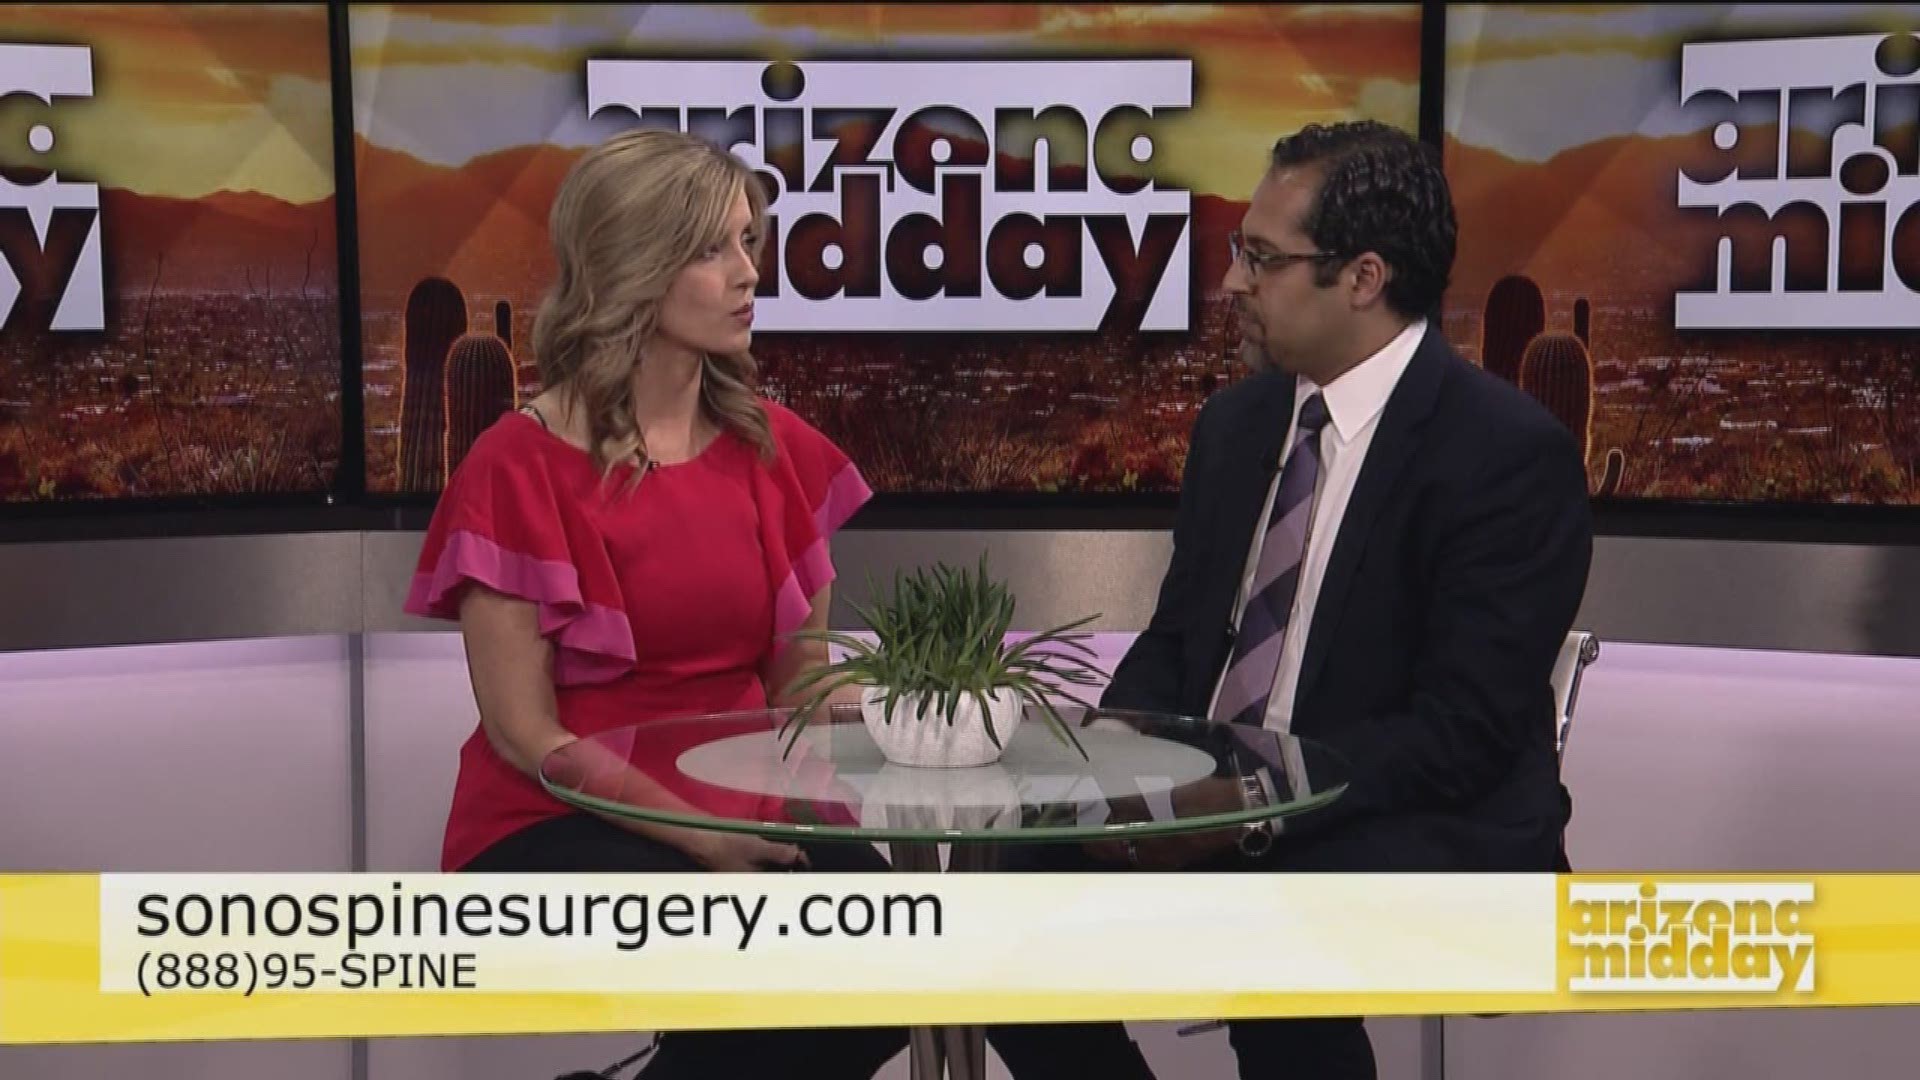 Dr. Mohamed Abdulhamid tells us about a revolutionary procedure that can correct neck and back pain.